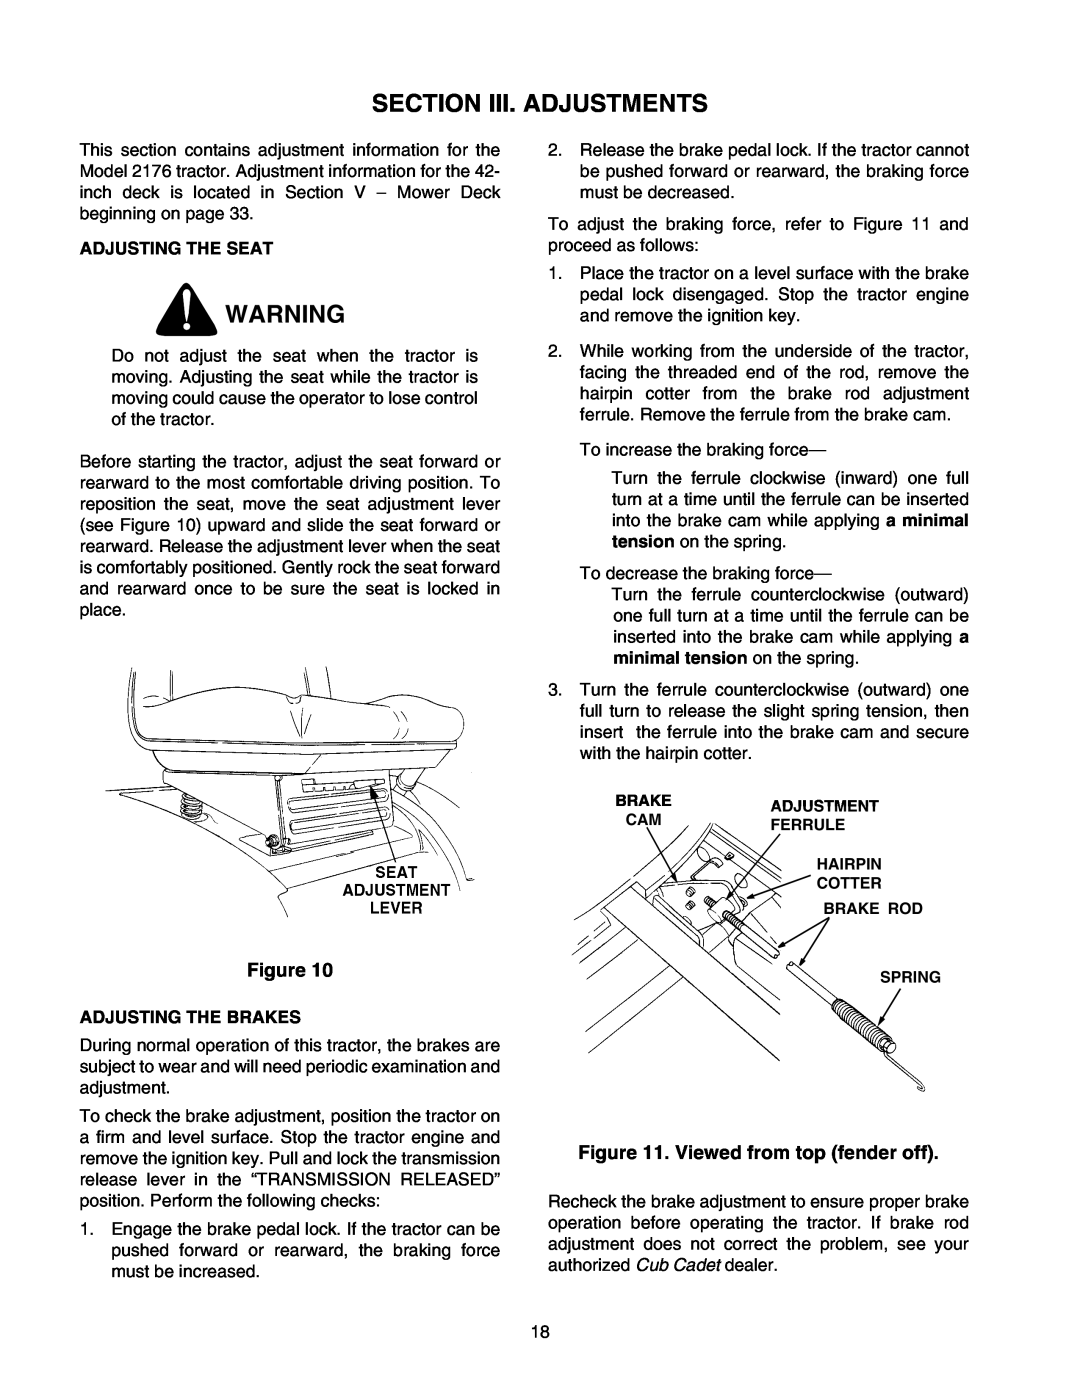 Cub Cadet 2176 manual Section Iii. Adjustments, Viewed from top fender off, Adjusting The Seat, Adjusting The Brakes 